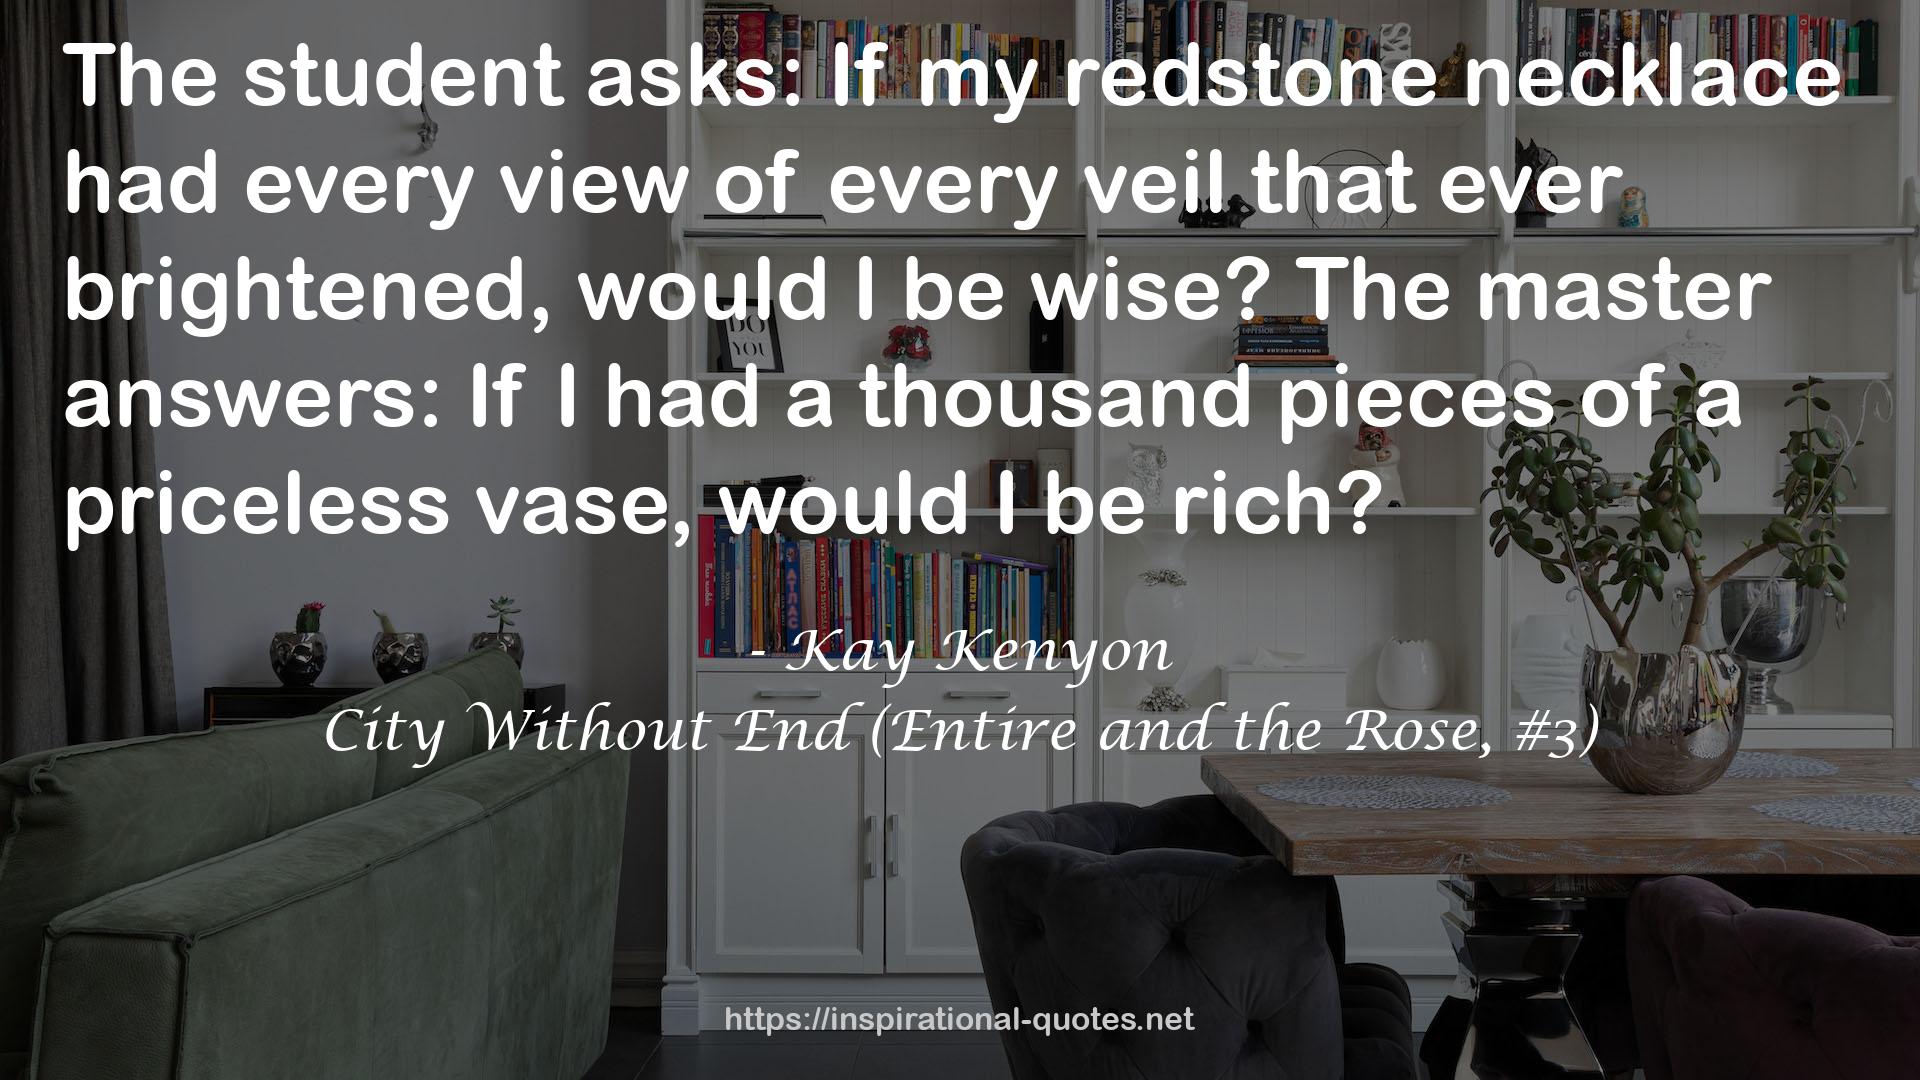 City Without End (Entire and the Rose, #3) QUOTES